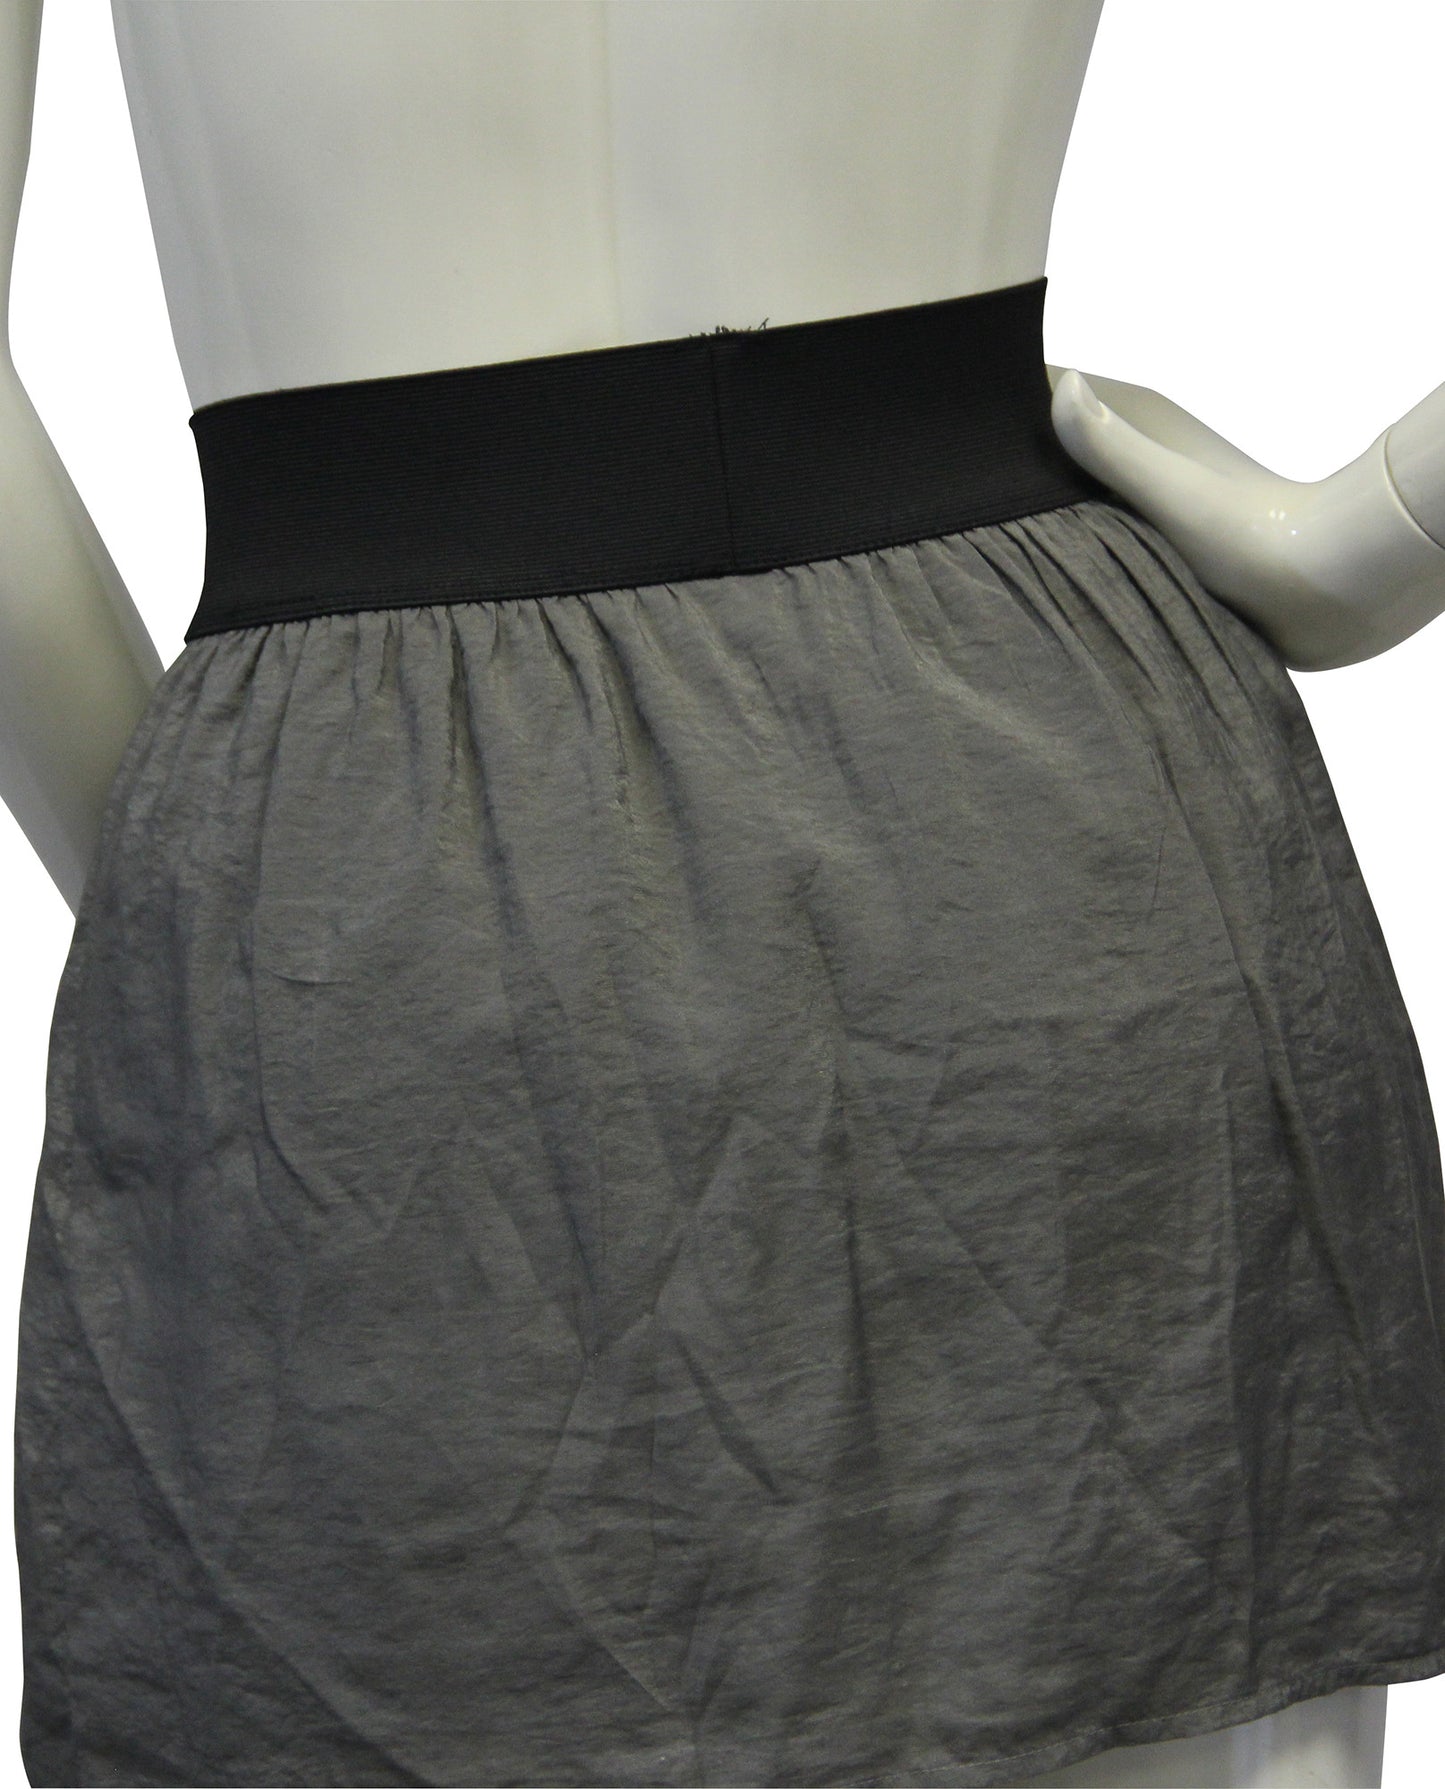 Load image into Gallery viewer, Steve Madden Gray Mini Skirt Size SM - Designers On A Dime - 3
